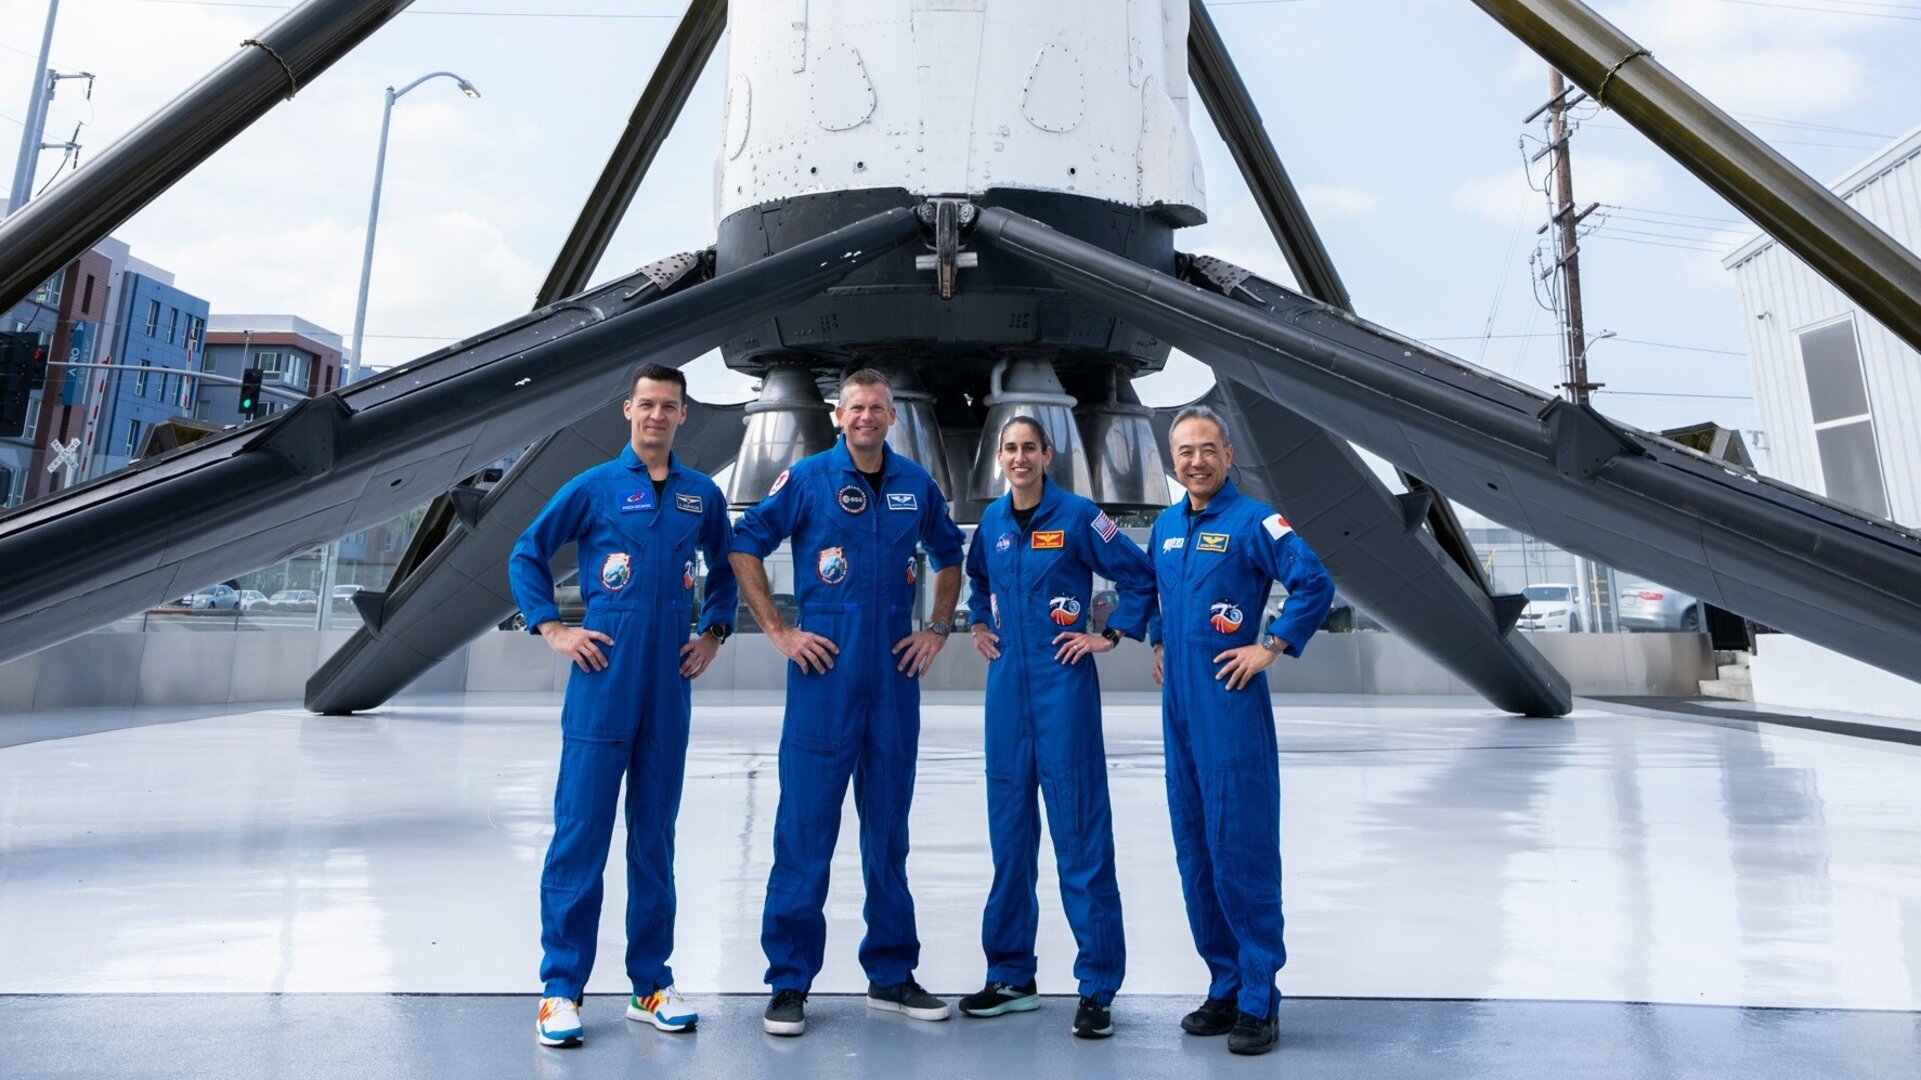 Crew 7 in front of Falcon 9